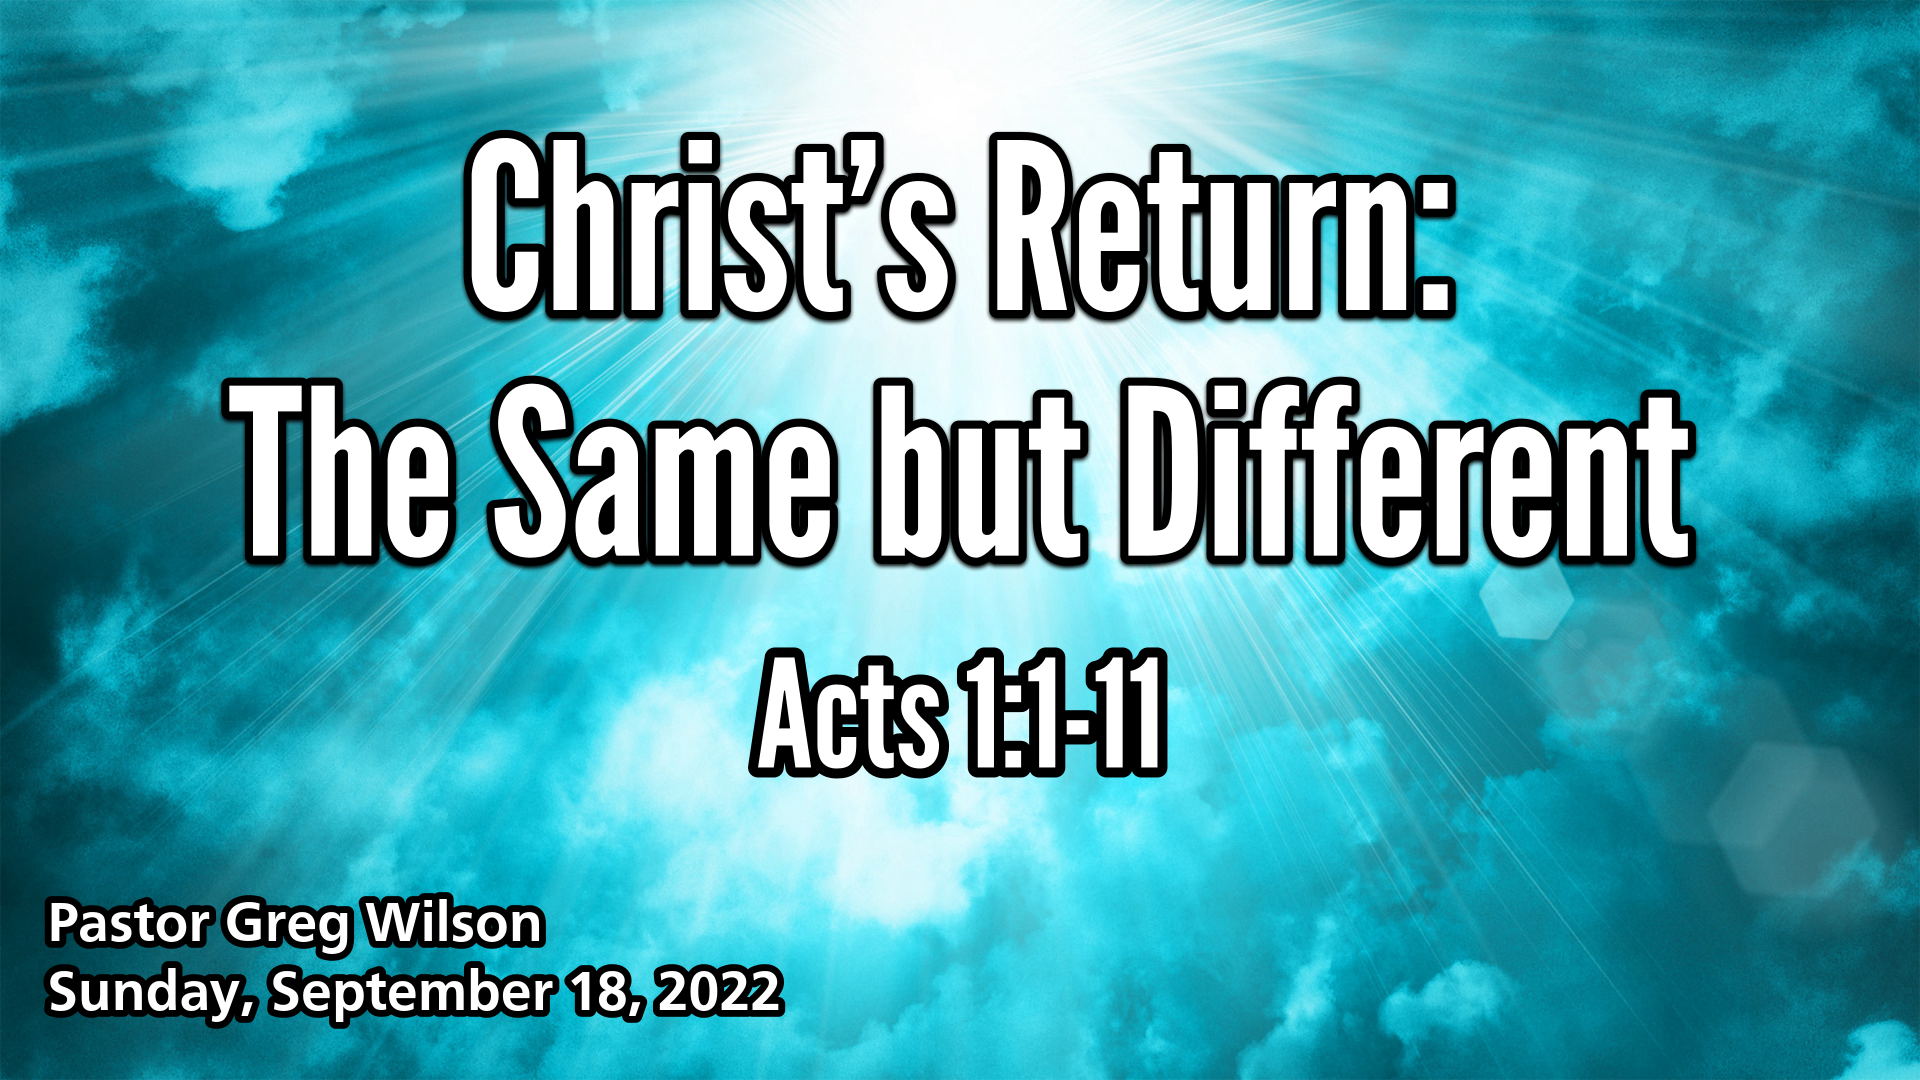 "Christ’s Return: The Same but Different"